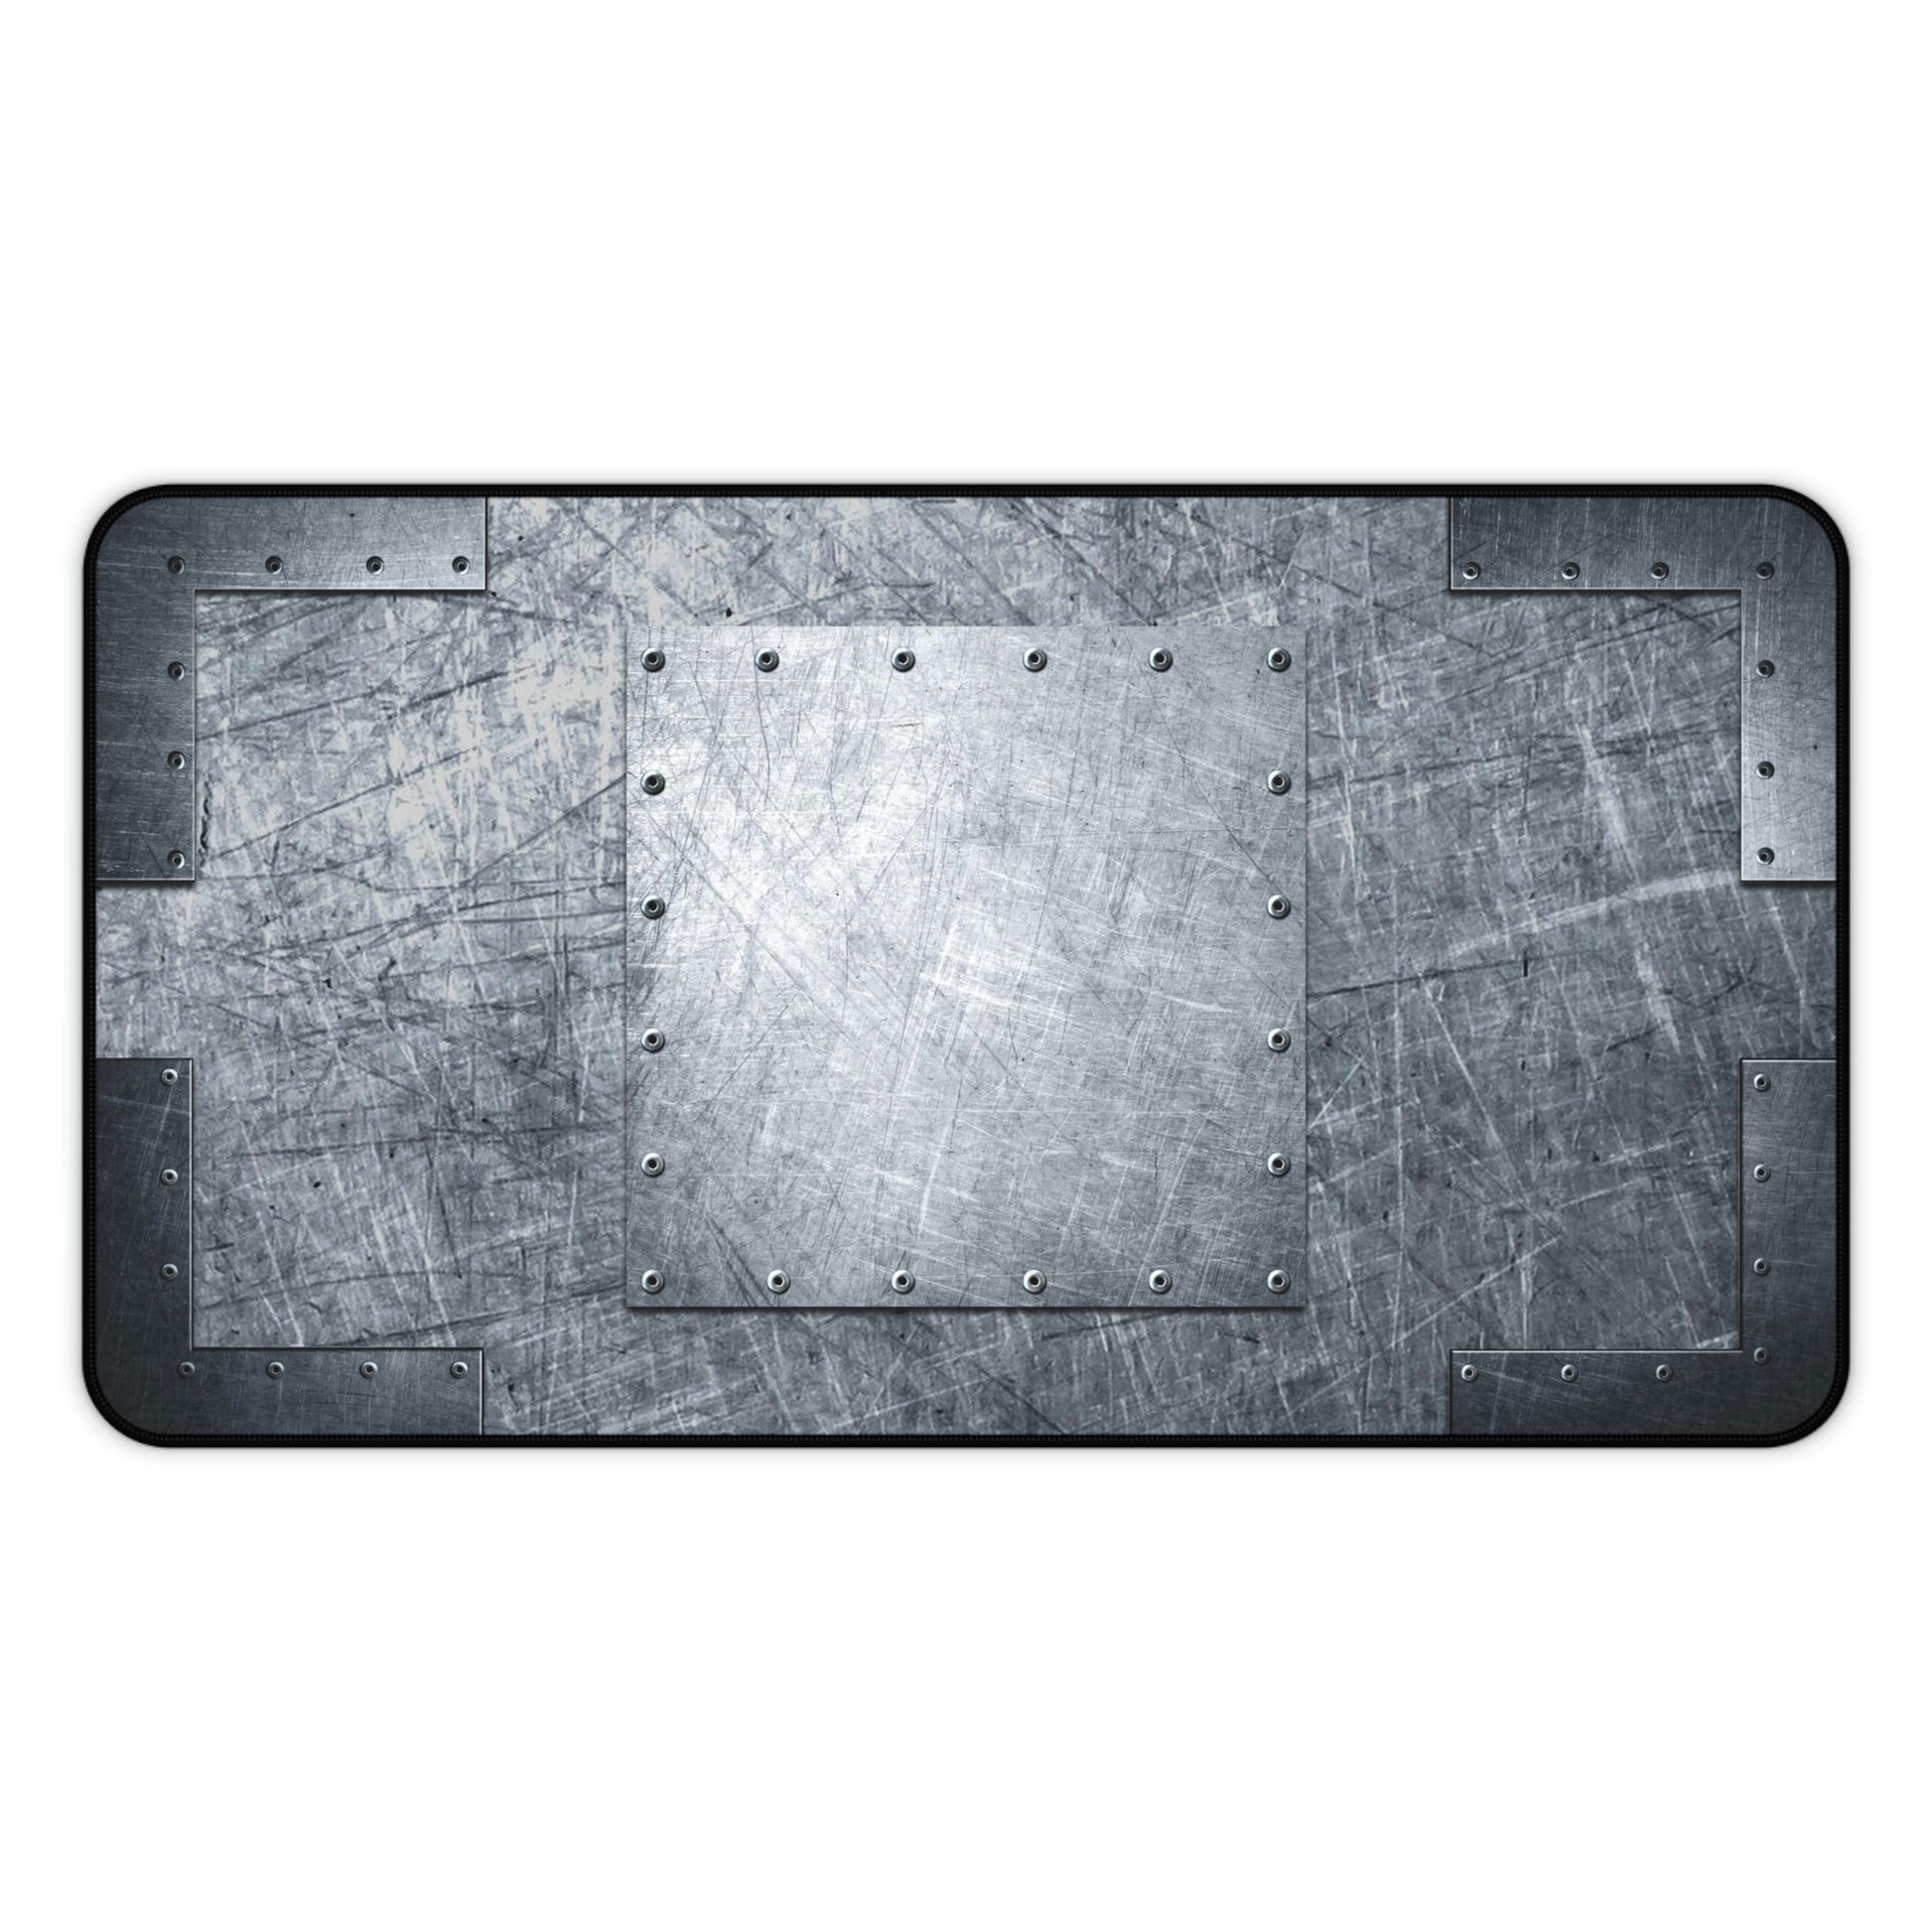 Industrial Themed Desk Accessories - Riveted Steel Sheets Print on Neoprene Desk Mat 12 by 22